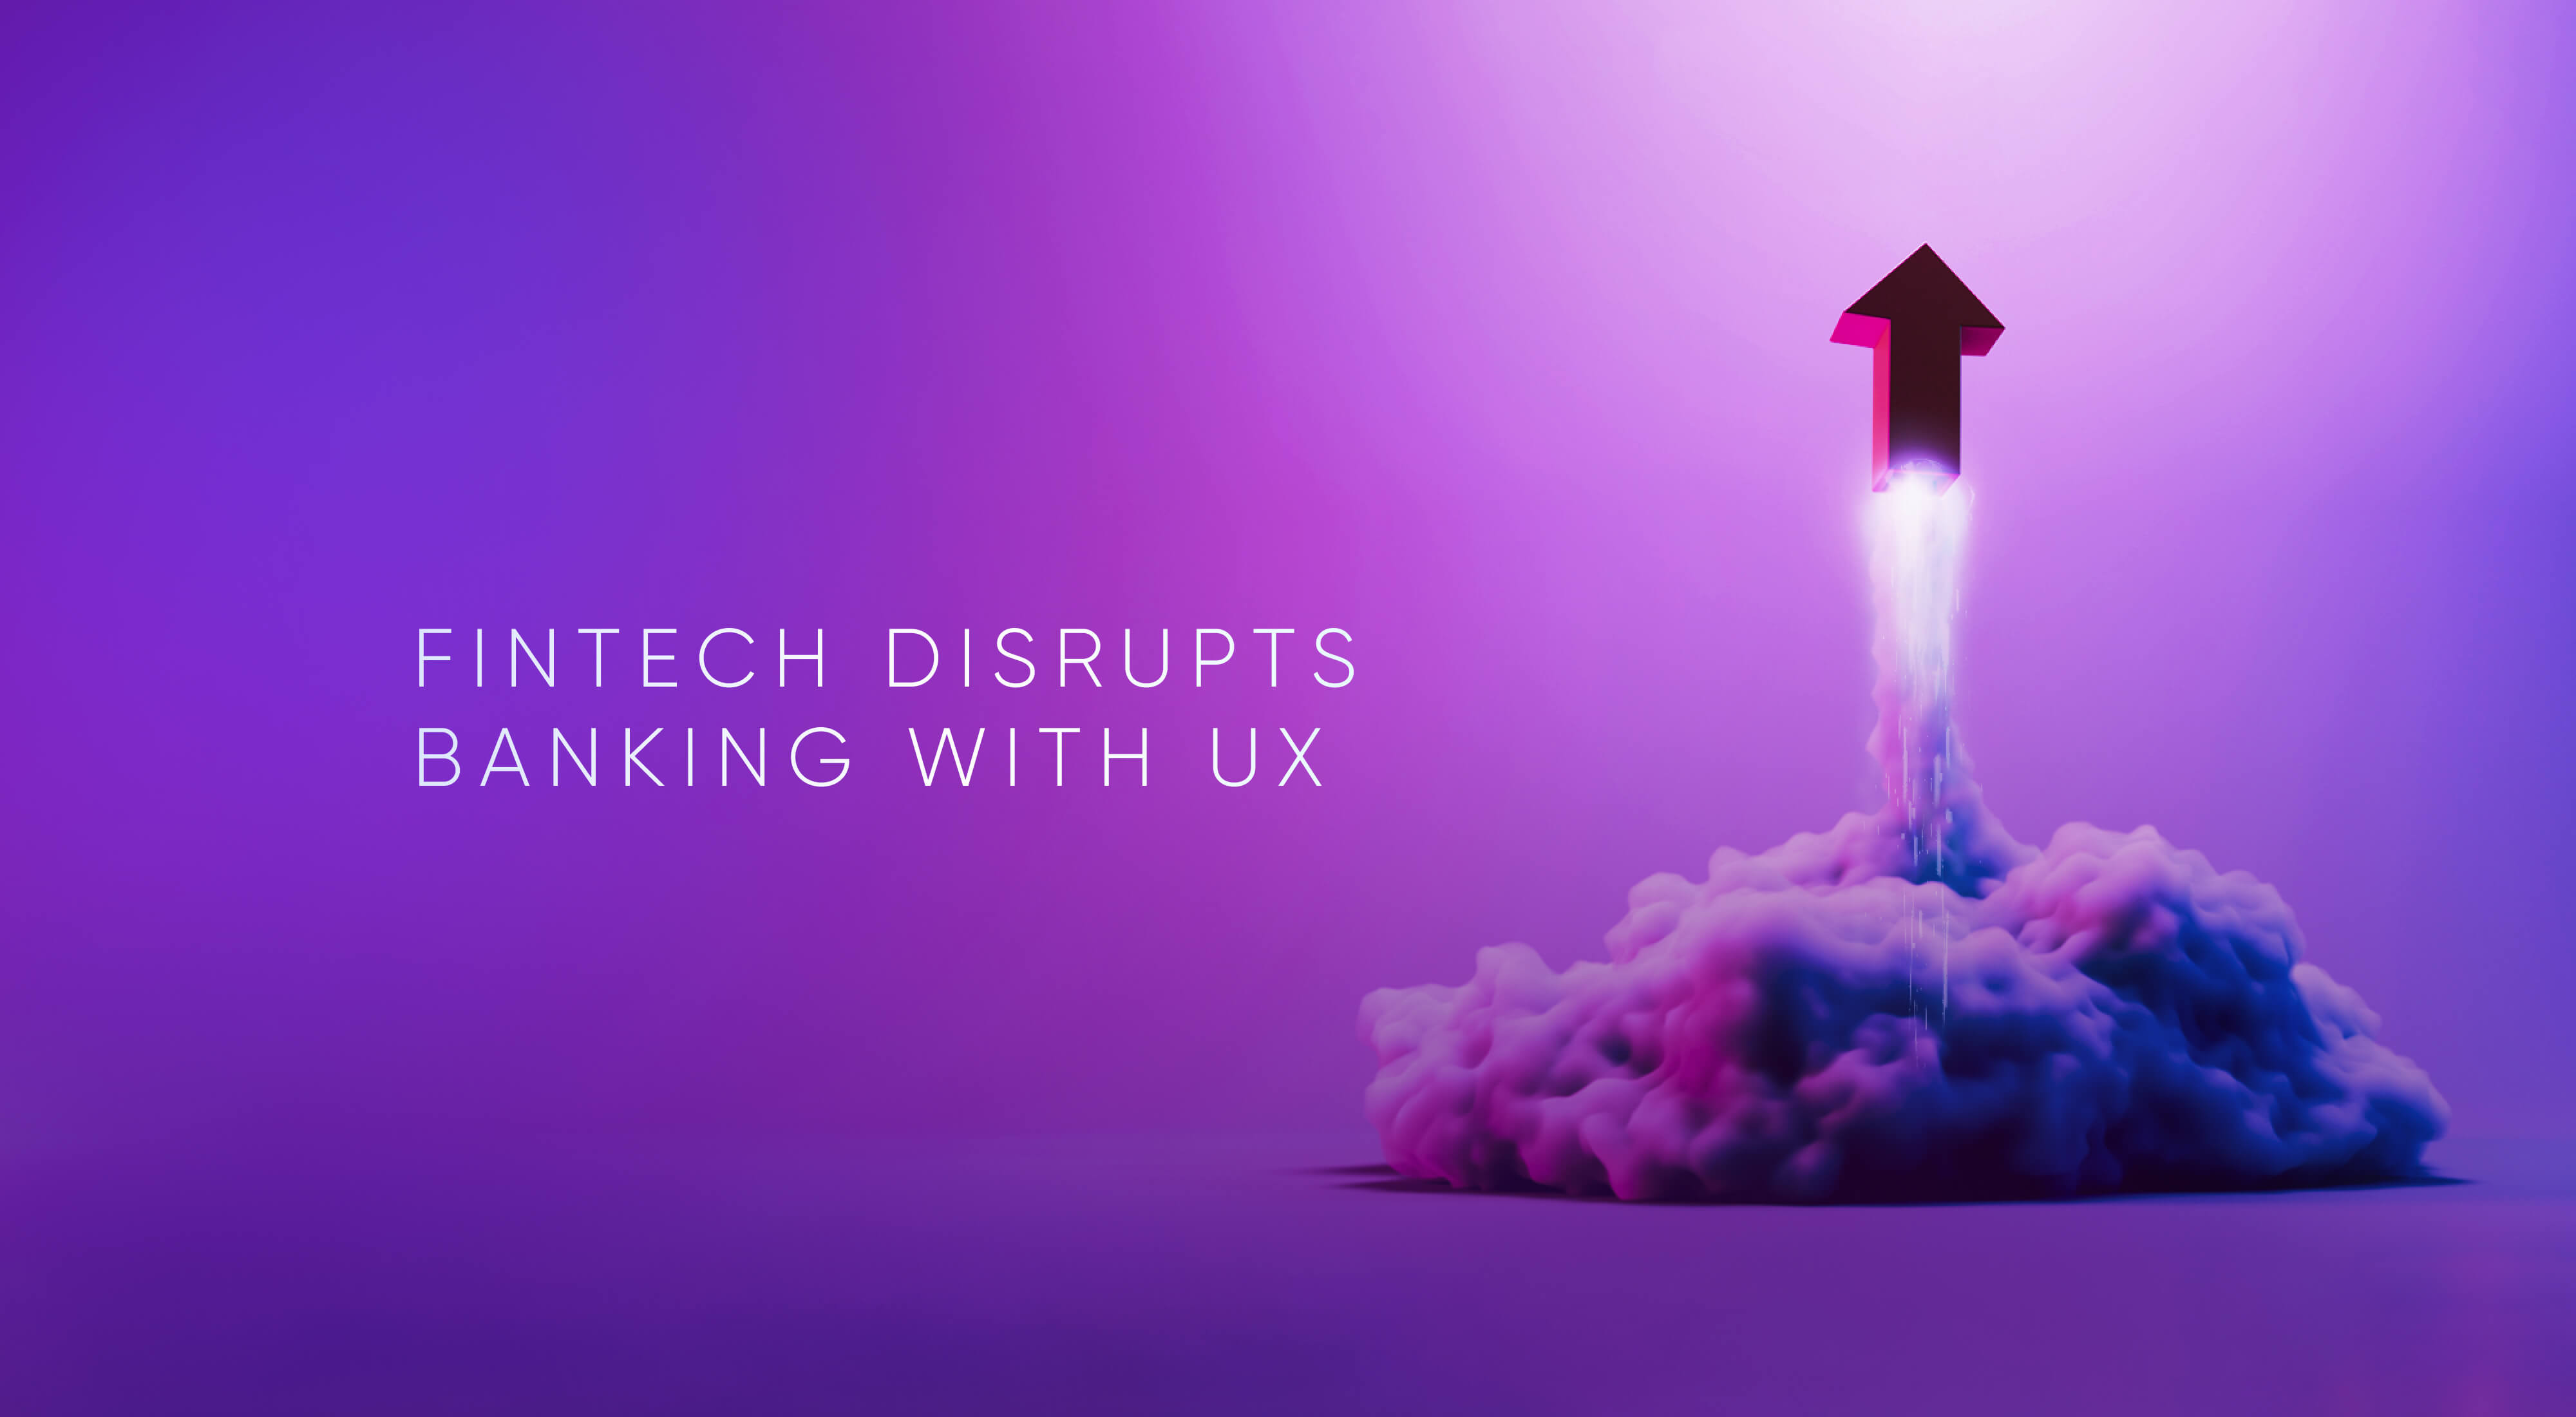 Fintech Disruption In the Banking Industry is Driven by UX Design